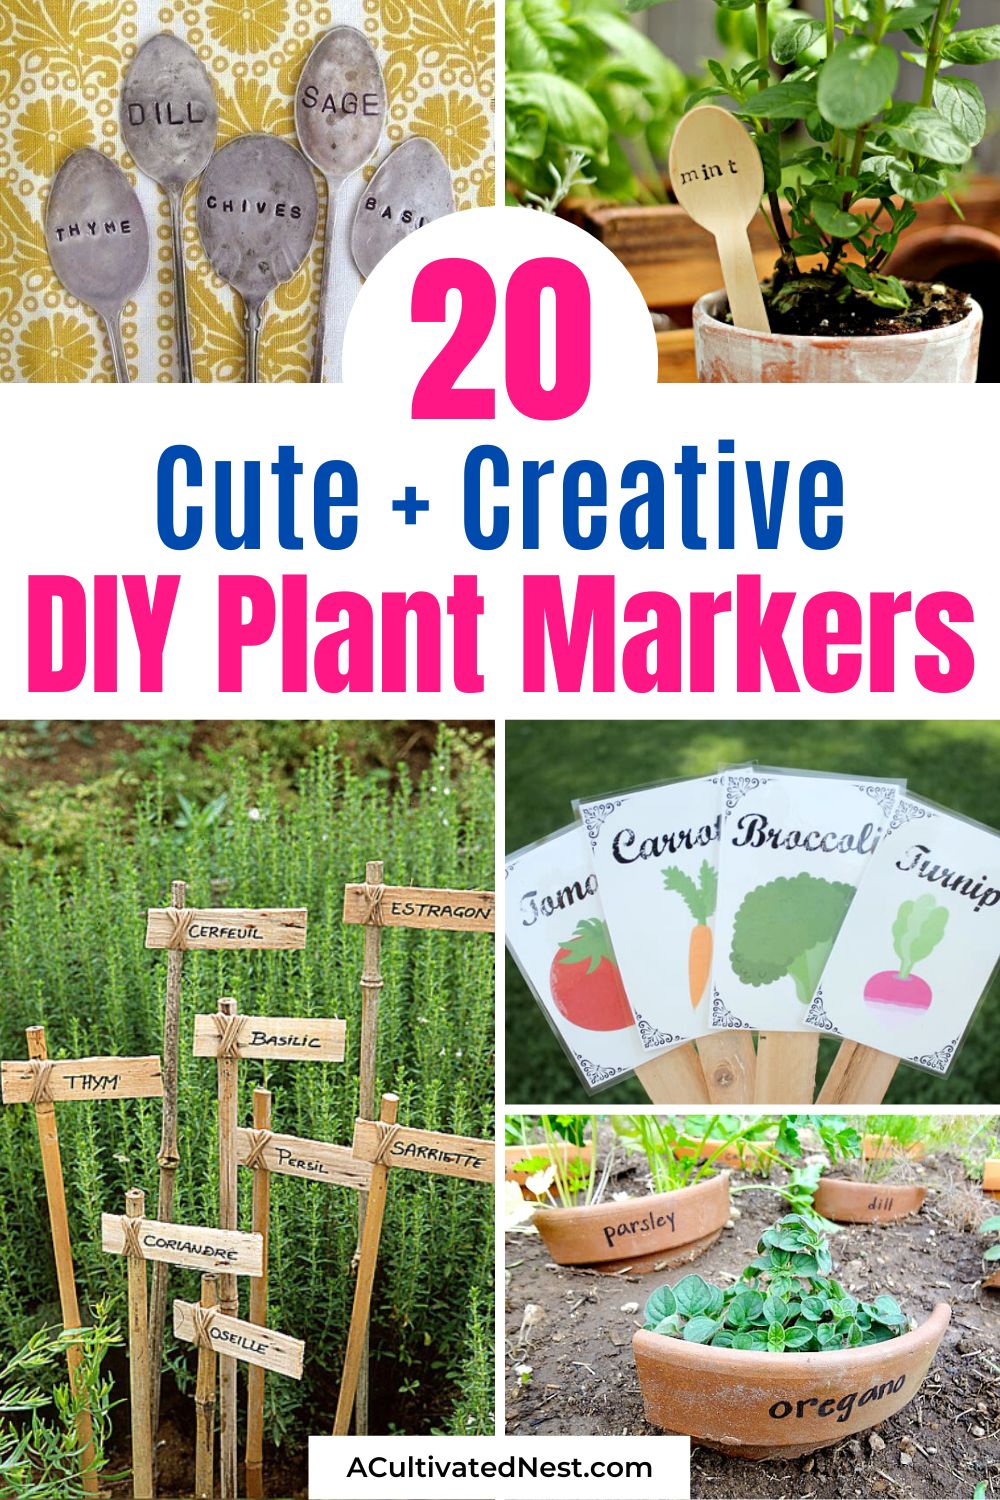 20 Creative Plant Marker Ideas- If you have some basic DIY skills, there's no need to spend money on store-bought plant markers. Instead, check out these cute and clever DIY plant marker ideas! | how to label plants in your garden, ideas for making plant markers, label your herbs, garden markers, #gardeningDIY #DIY #garden #craft #ACultivatedNest